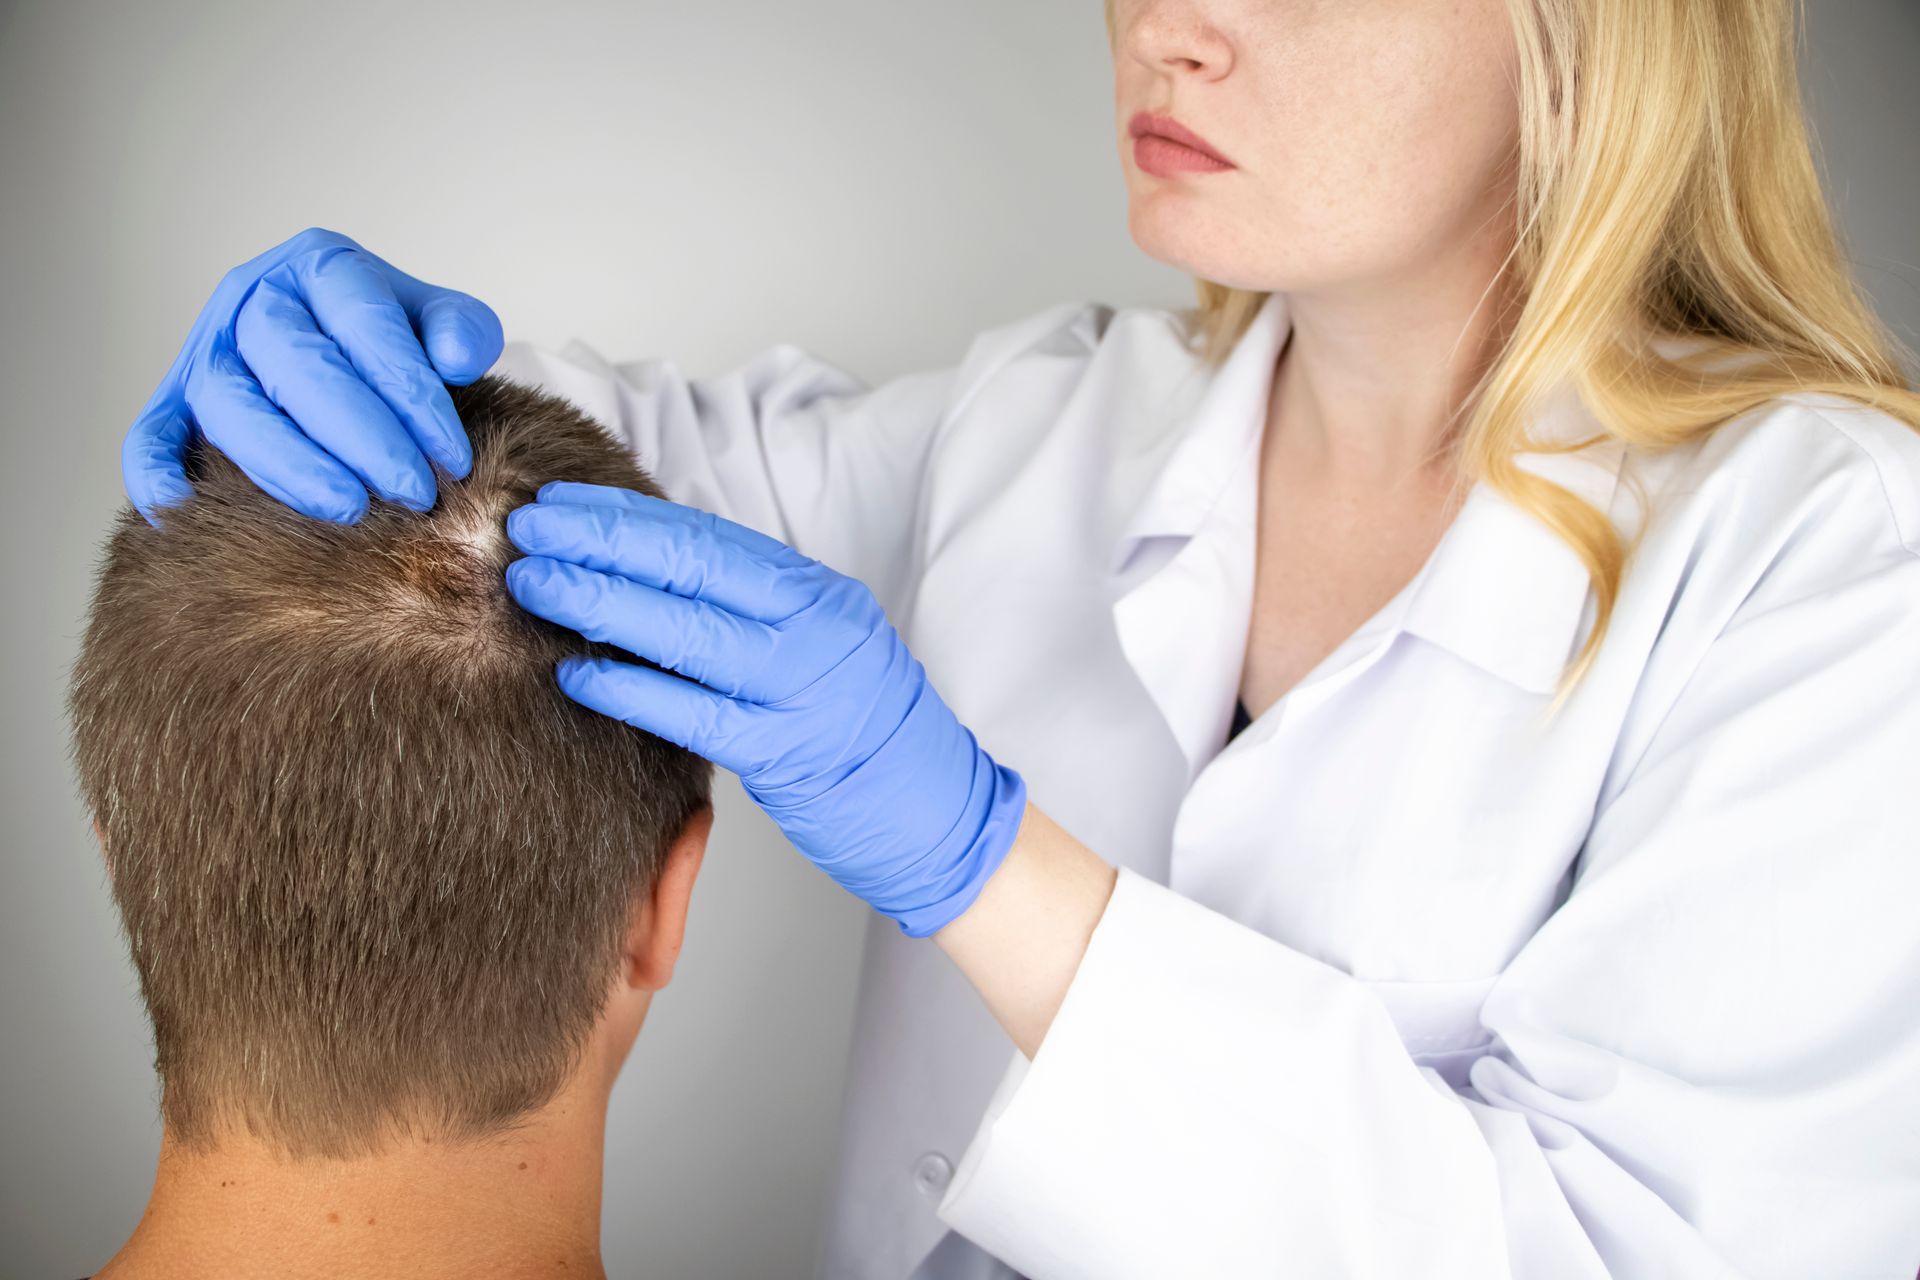 a doctor is examining a man 's hair with blue gloves .